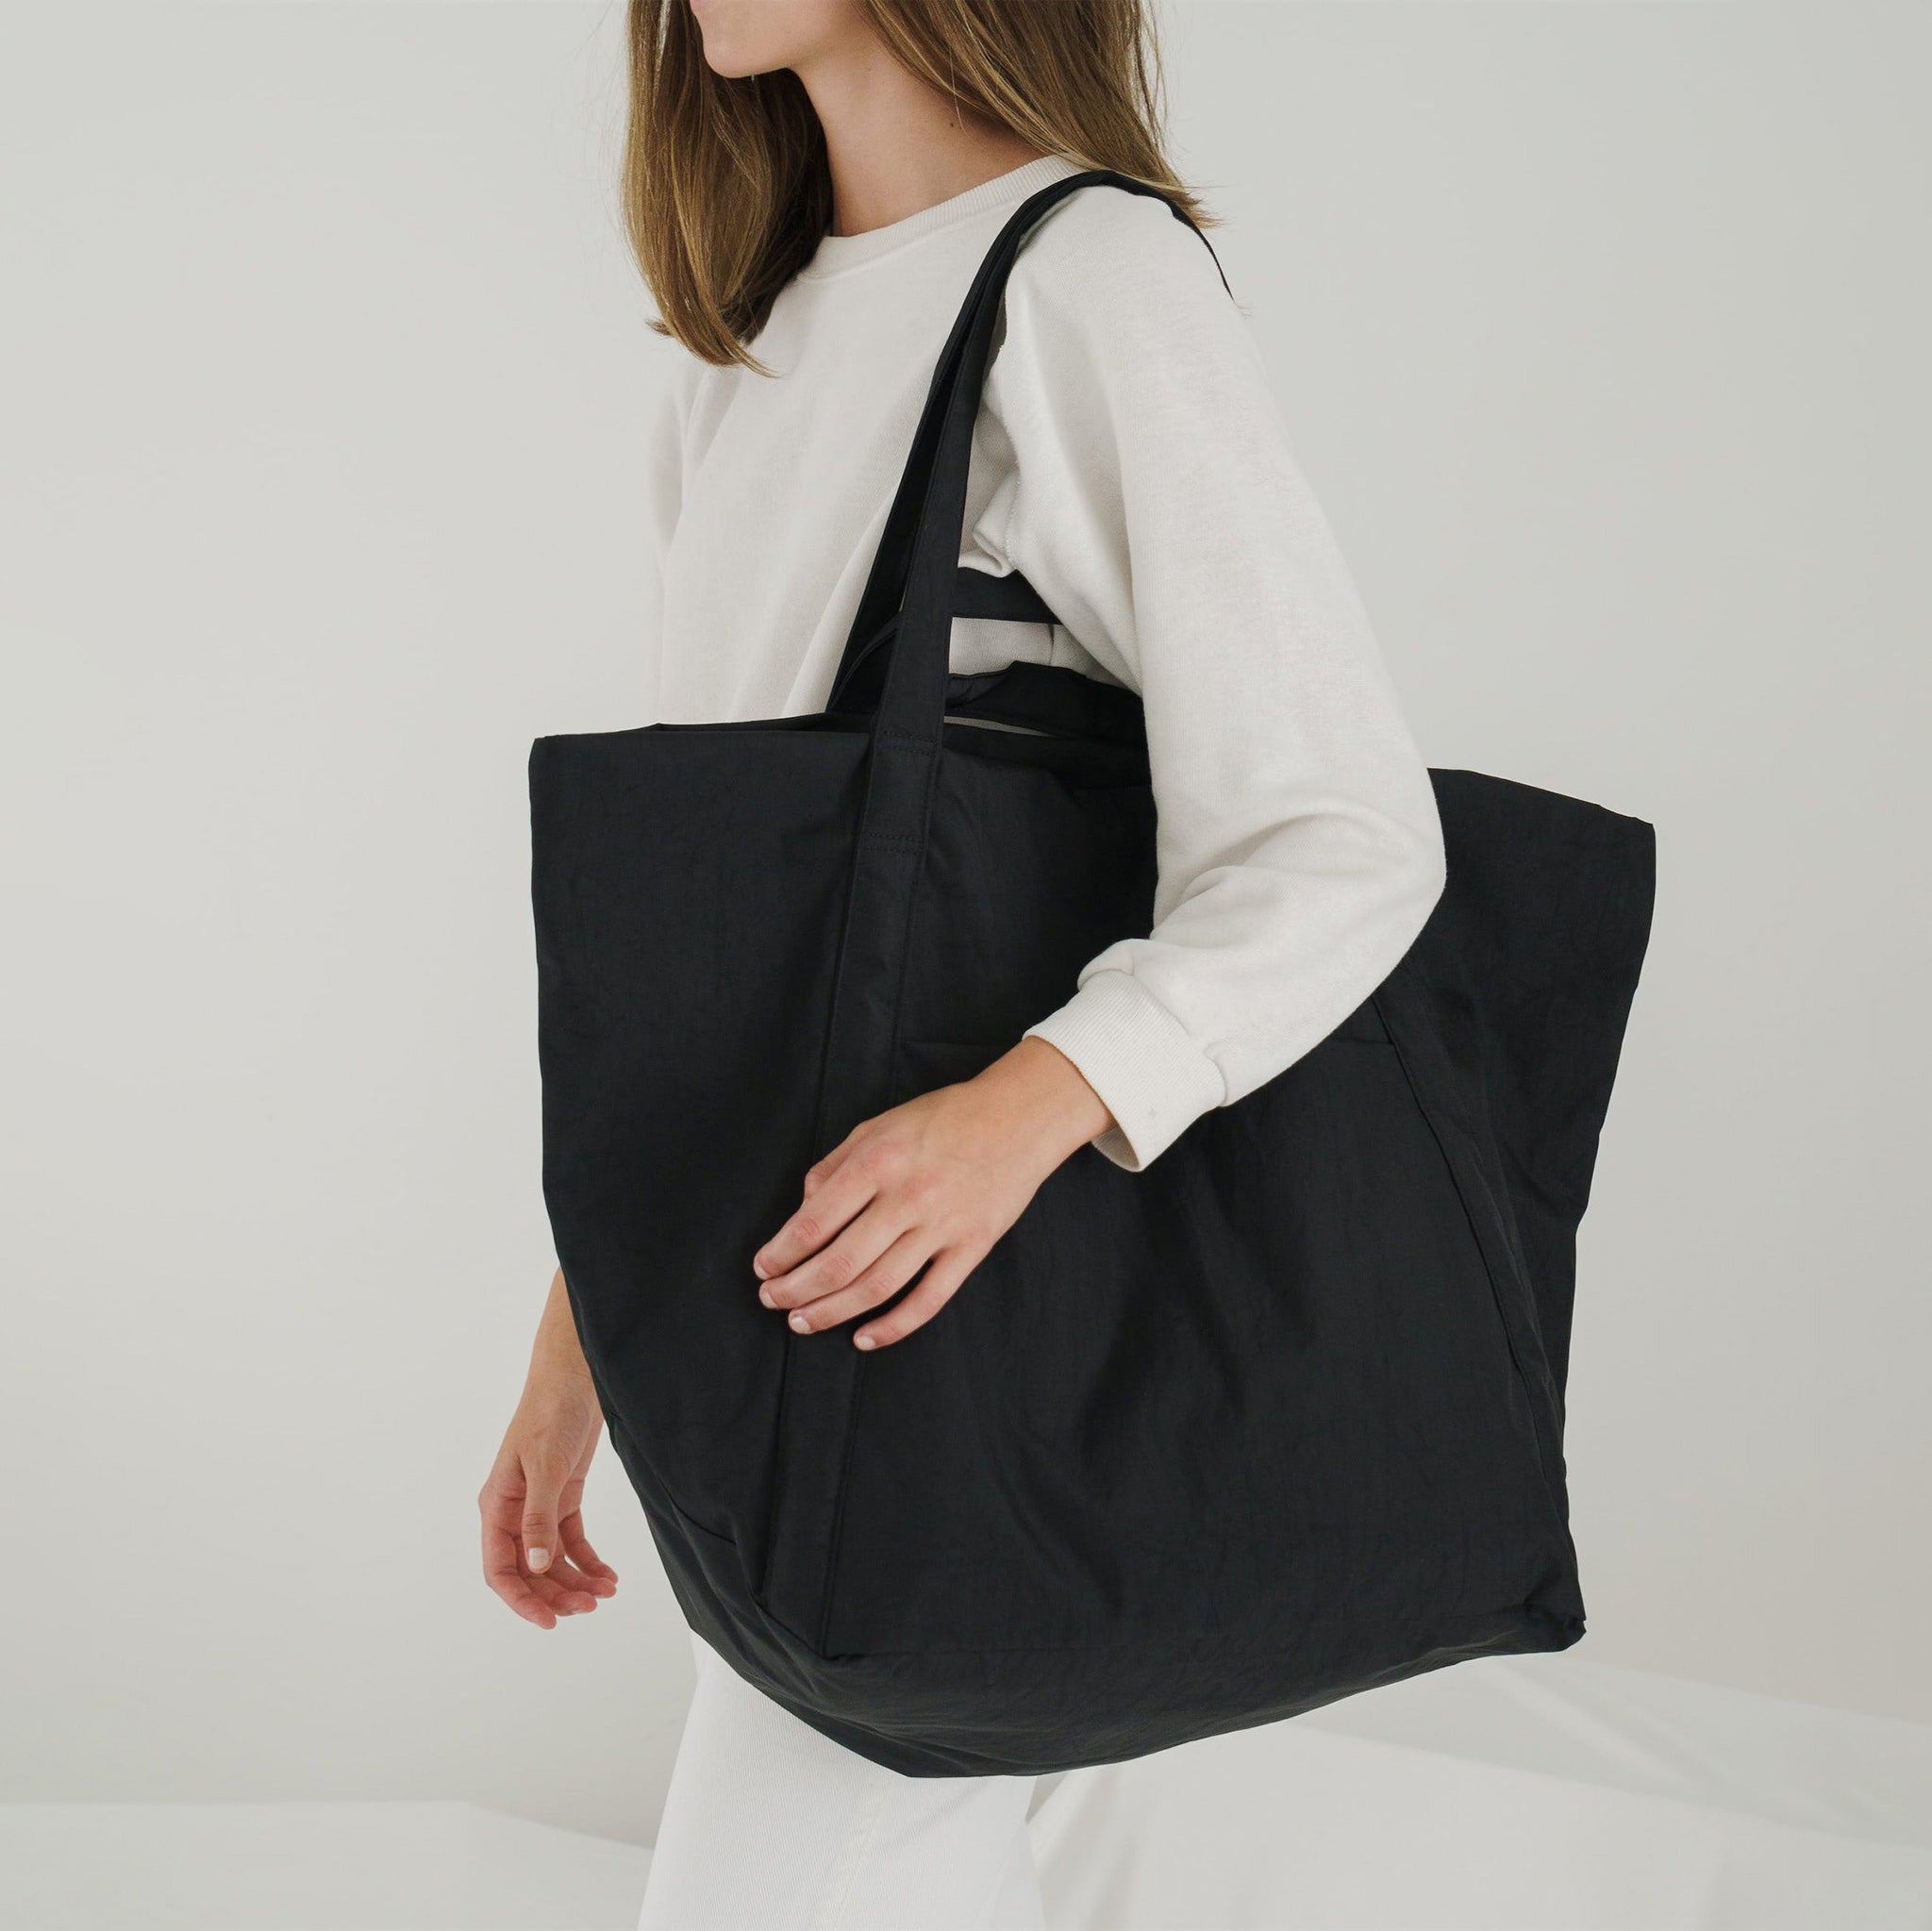 A large trapezoidal black nylon tote bag meant for traveling, fabricated in a puffy crinkly fabric, shown on the shoulder of a model.